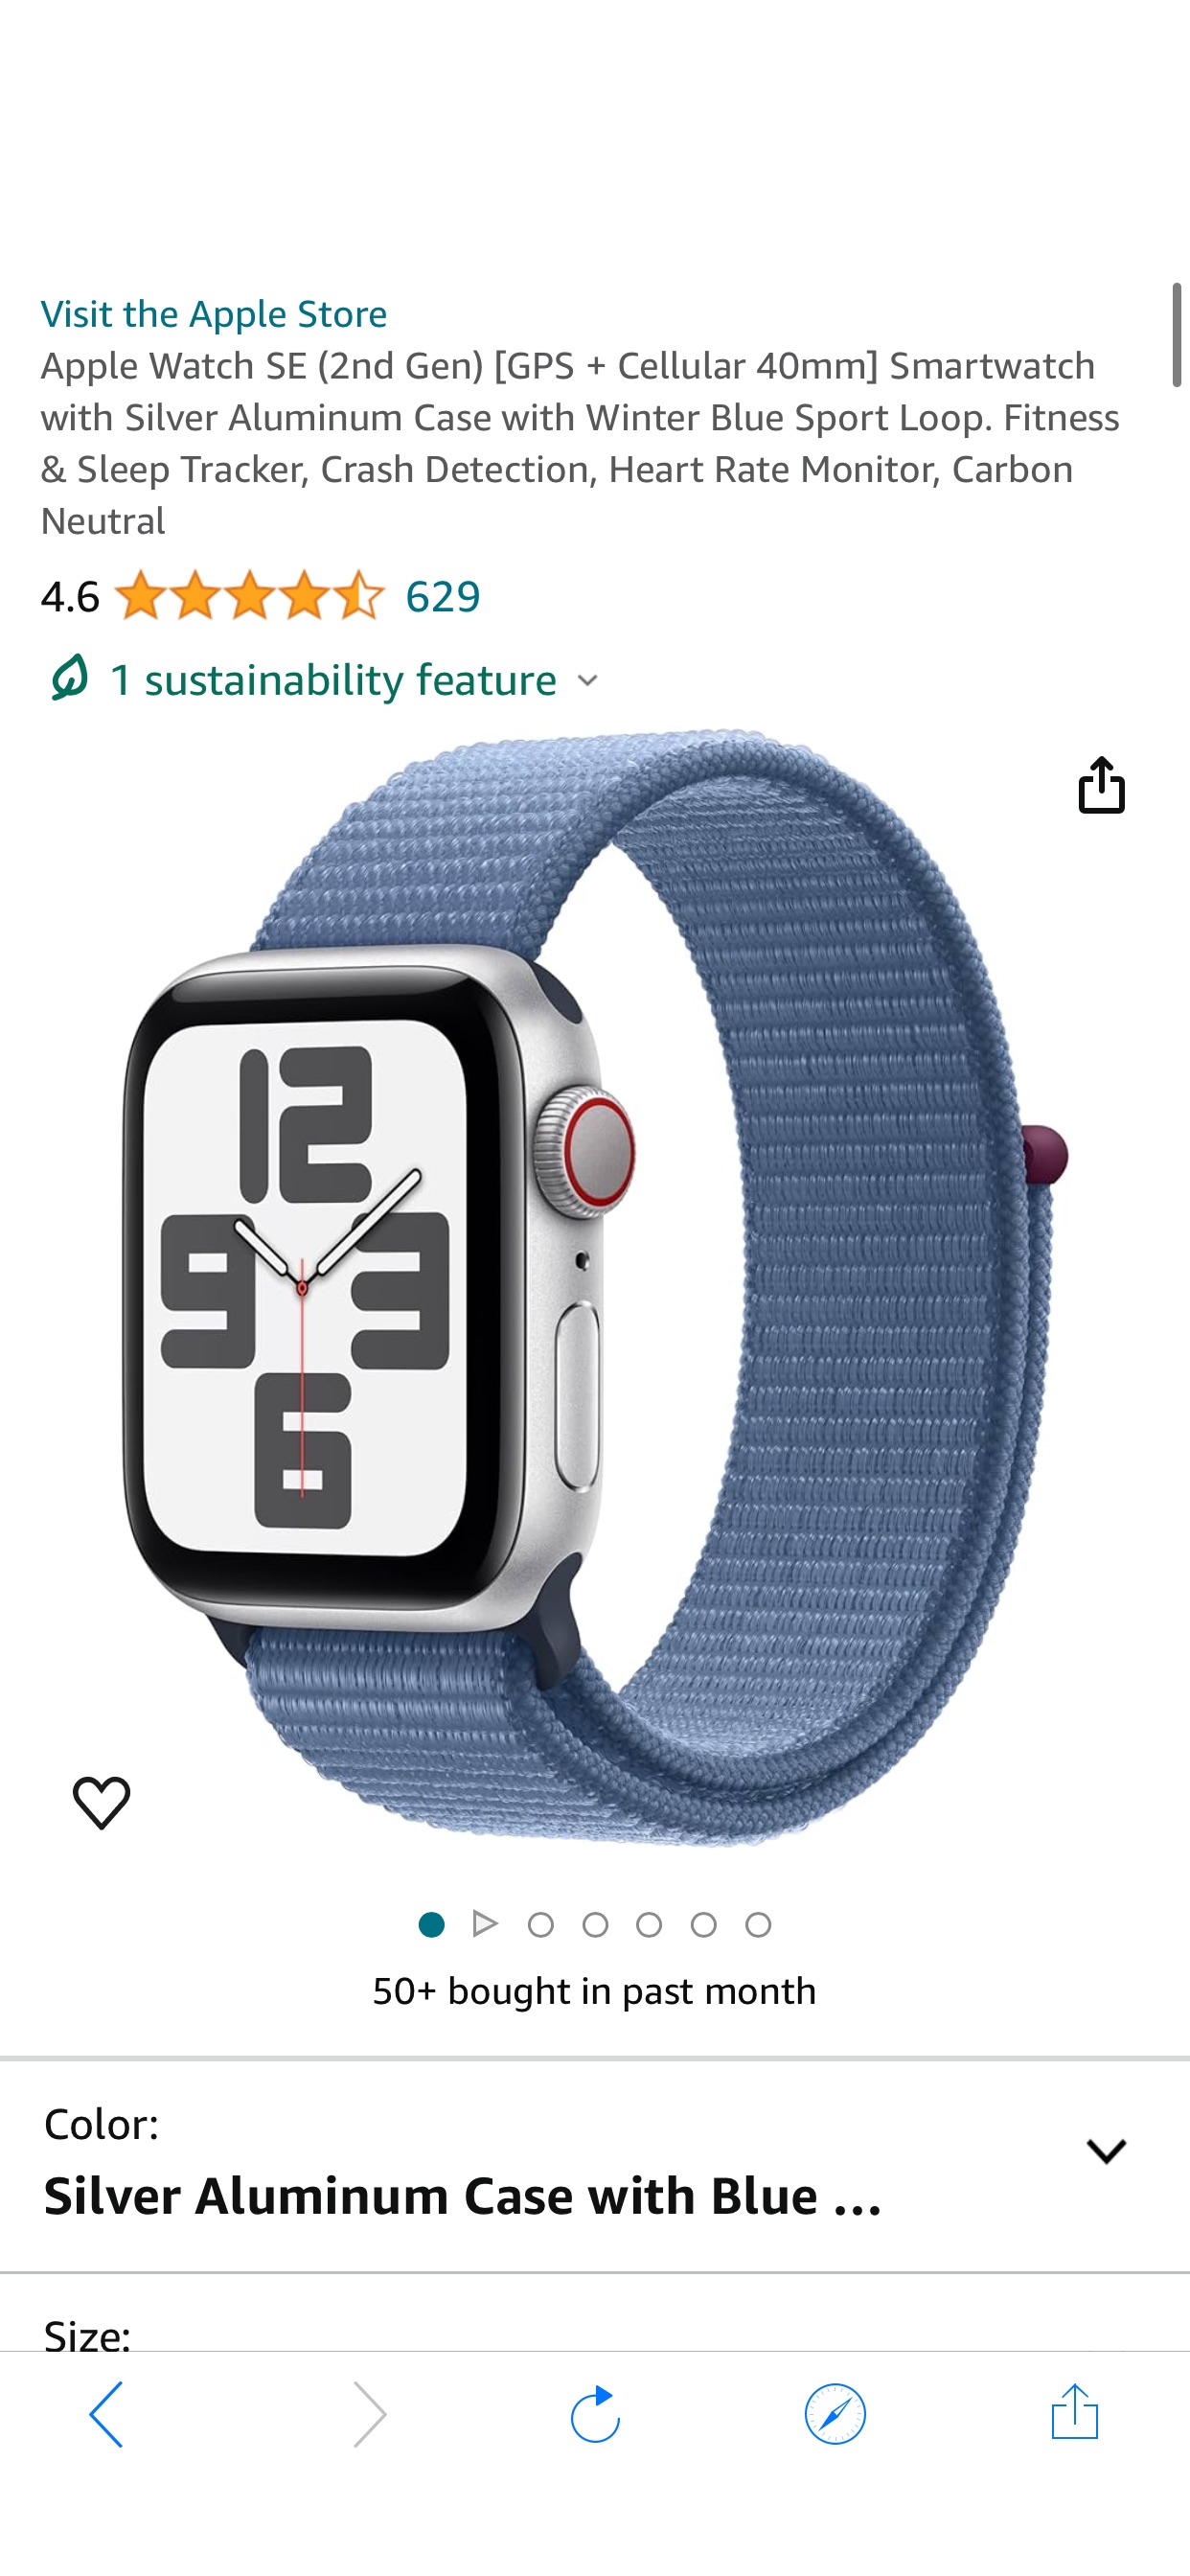 Amazon.com: Apple Watch SE (2nd Gen) [GPS + Cellular 40mm] Smartwatch with Silver Aluminum Case with Winter Blue Sport Loop. Fitness & Sleep Tracker, Crash Detection, Heart Rate Monitor, Carbon Neutra